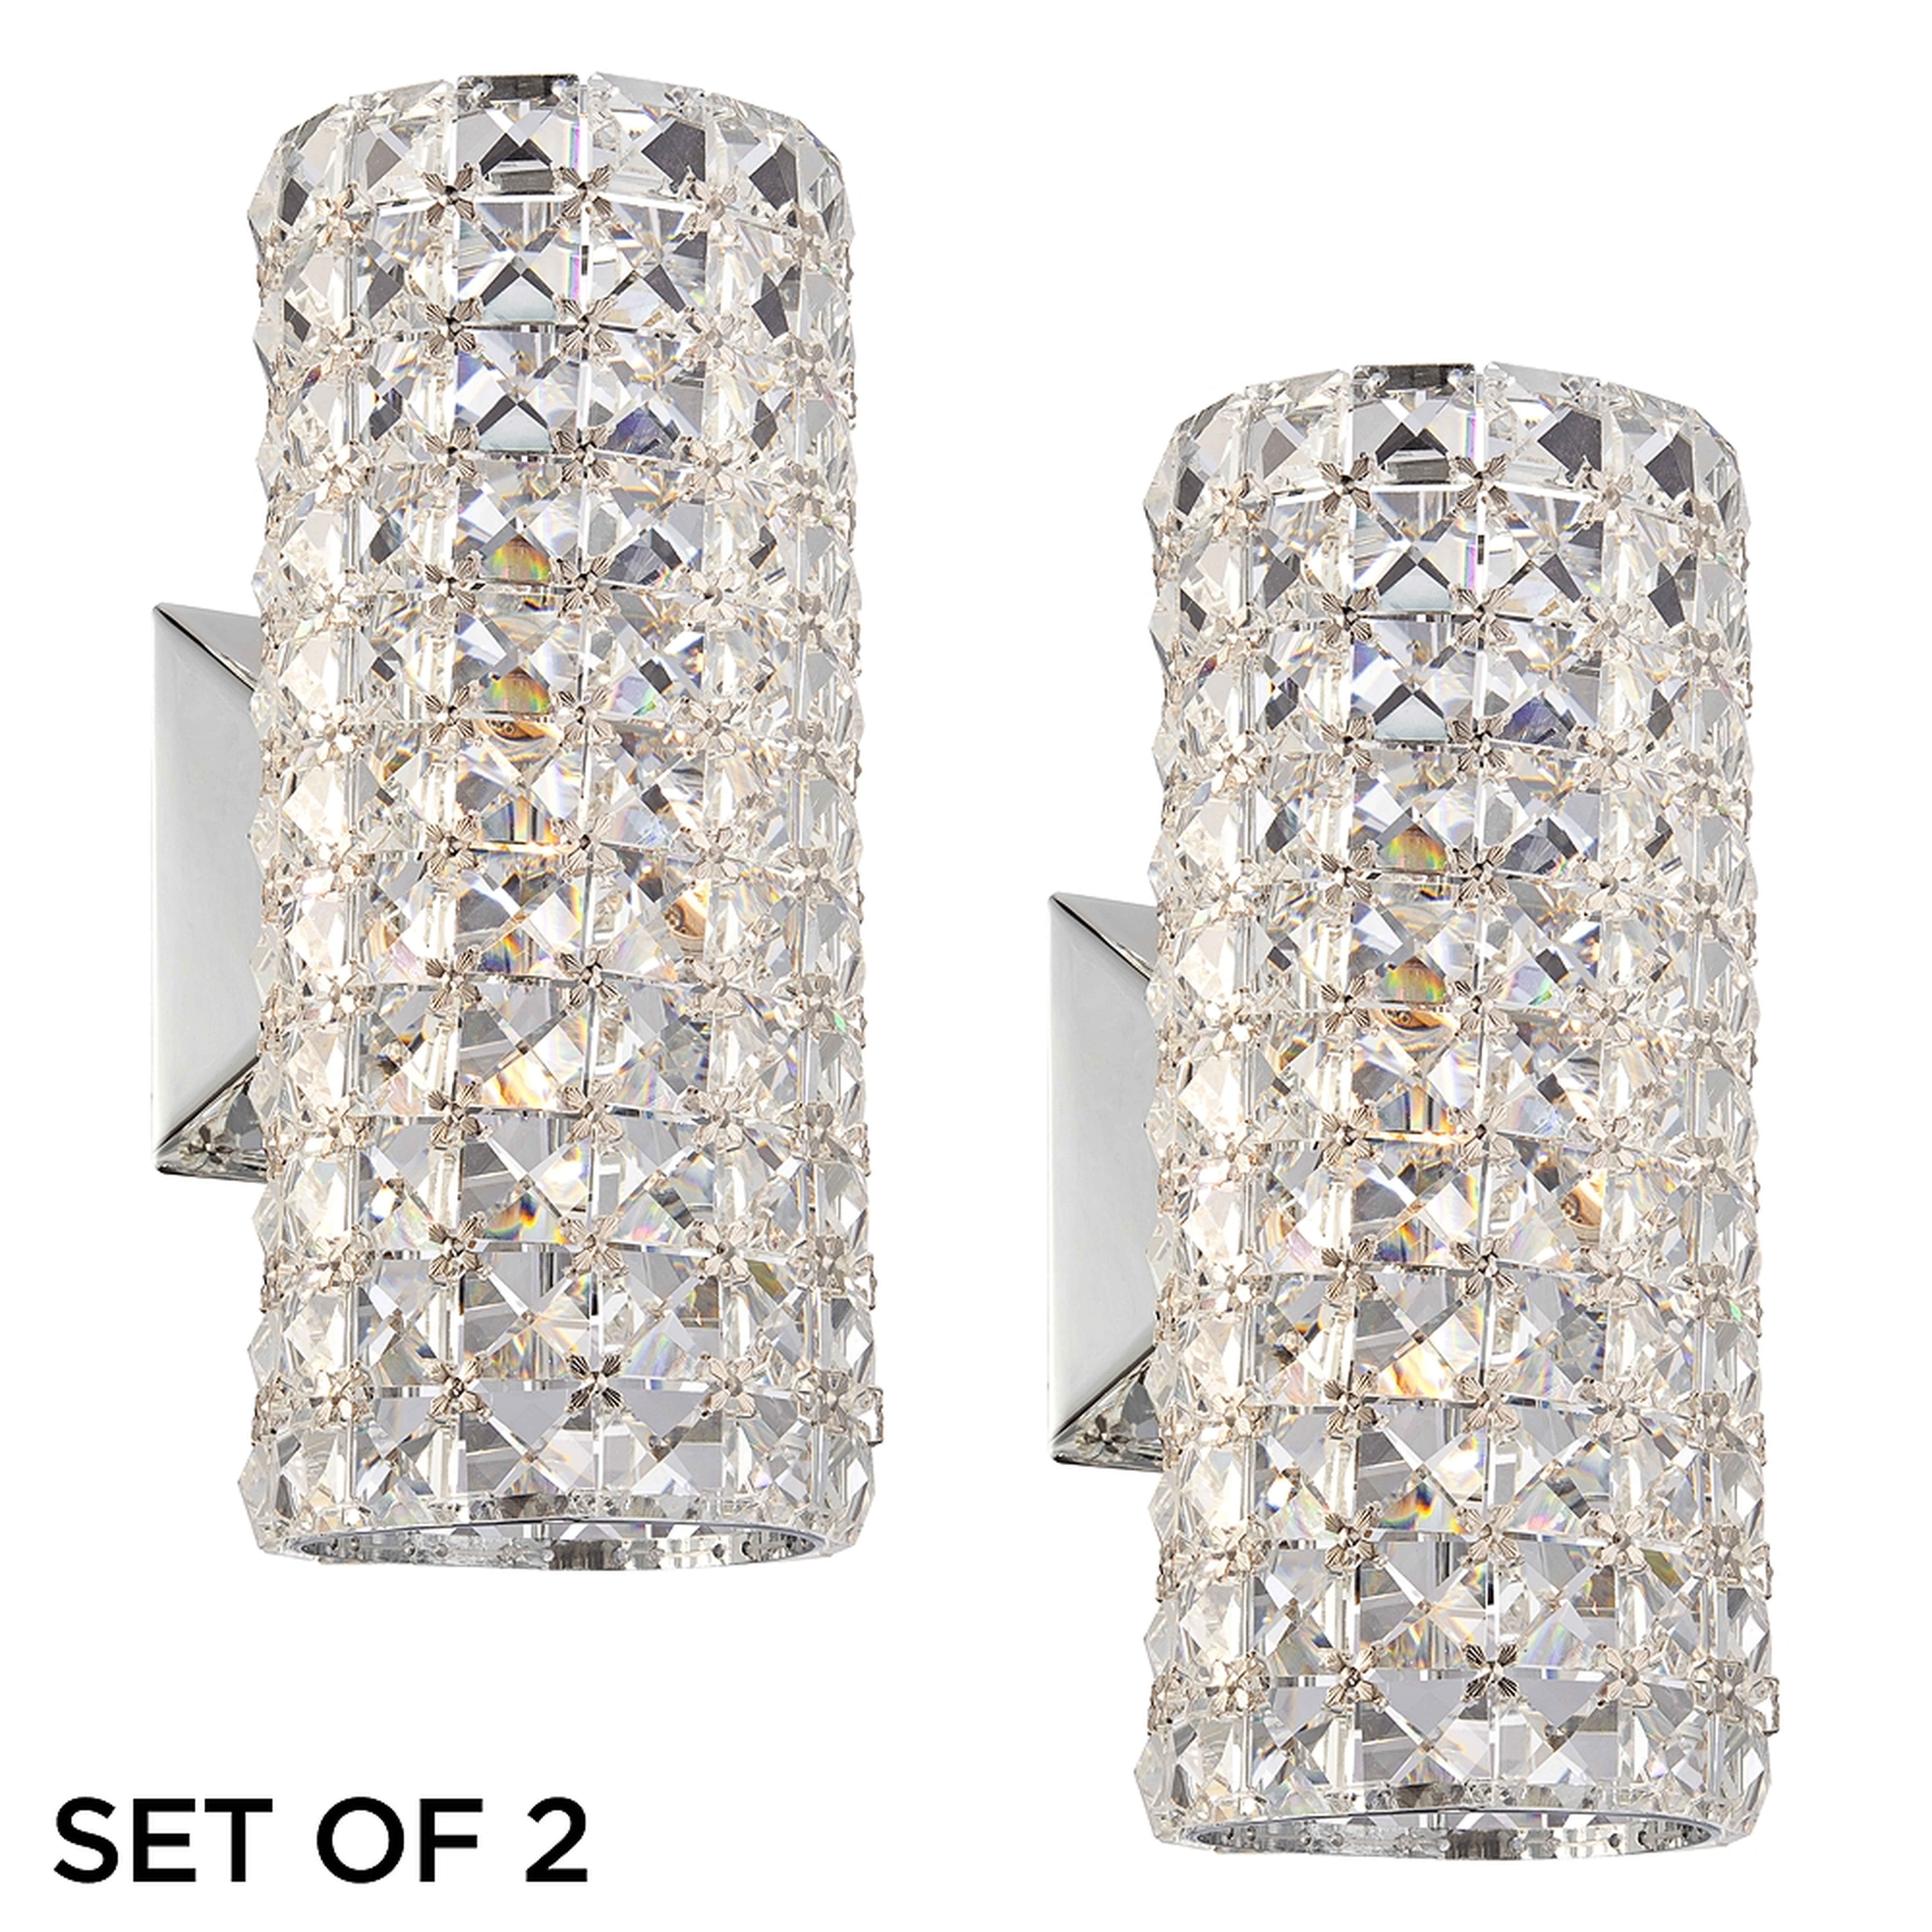 Cesenna 10 1/4" High Crystal LED Wall Sconces Set of 2 - Lamps Plus